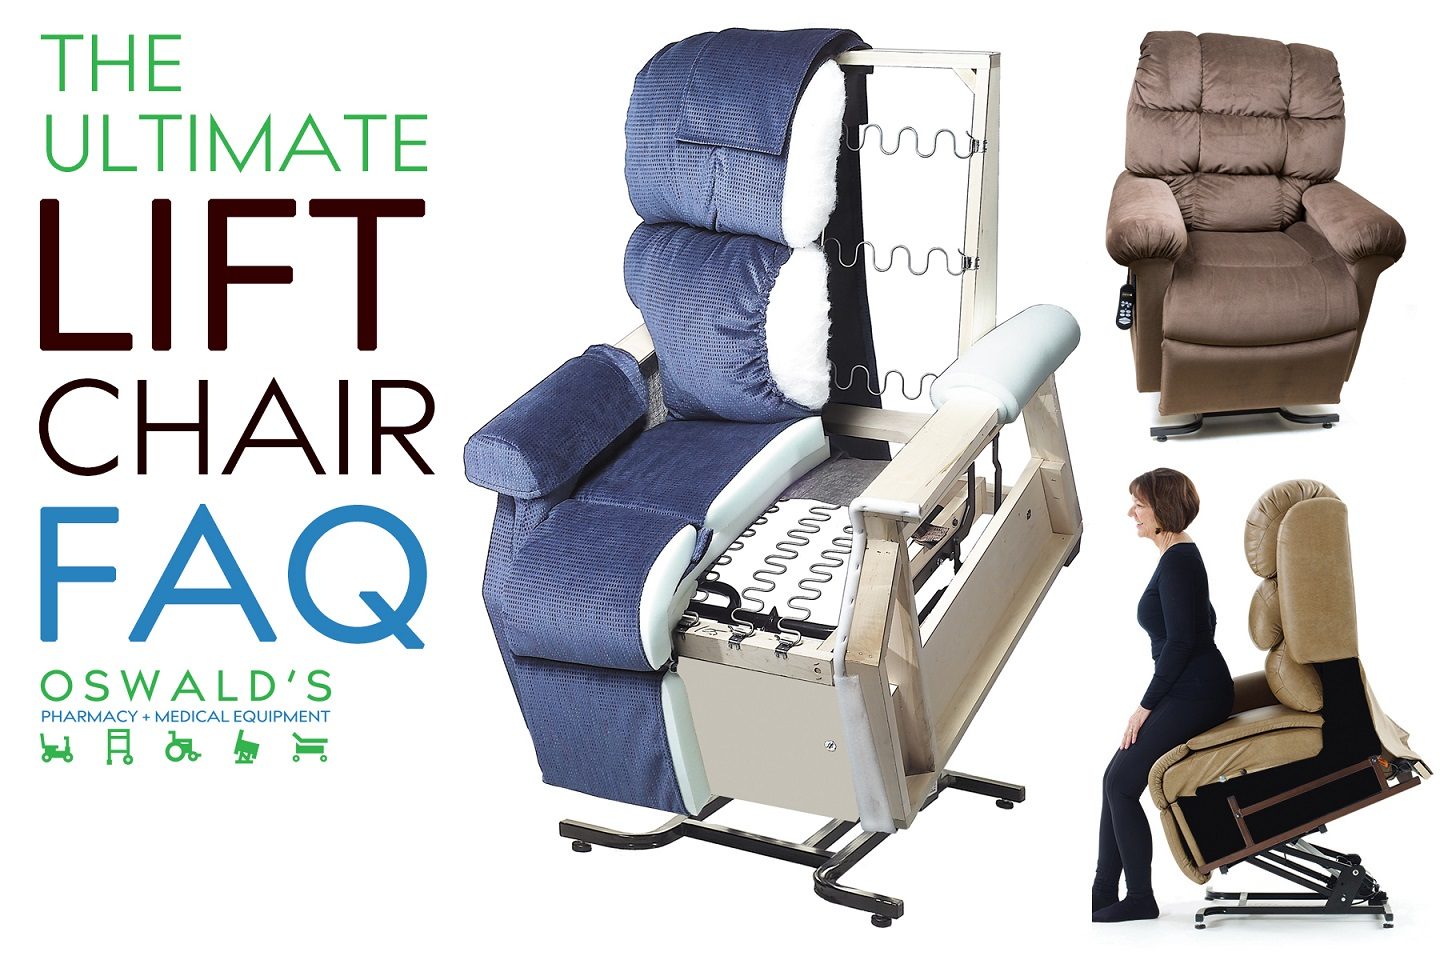 The Ultimate Lift Chair Faq Start Your Lift Chair Search Here